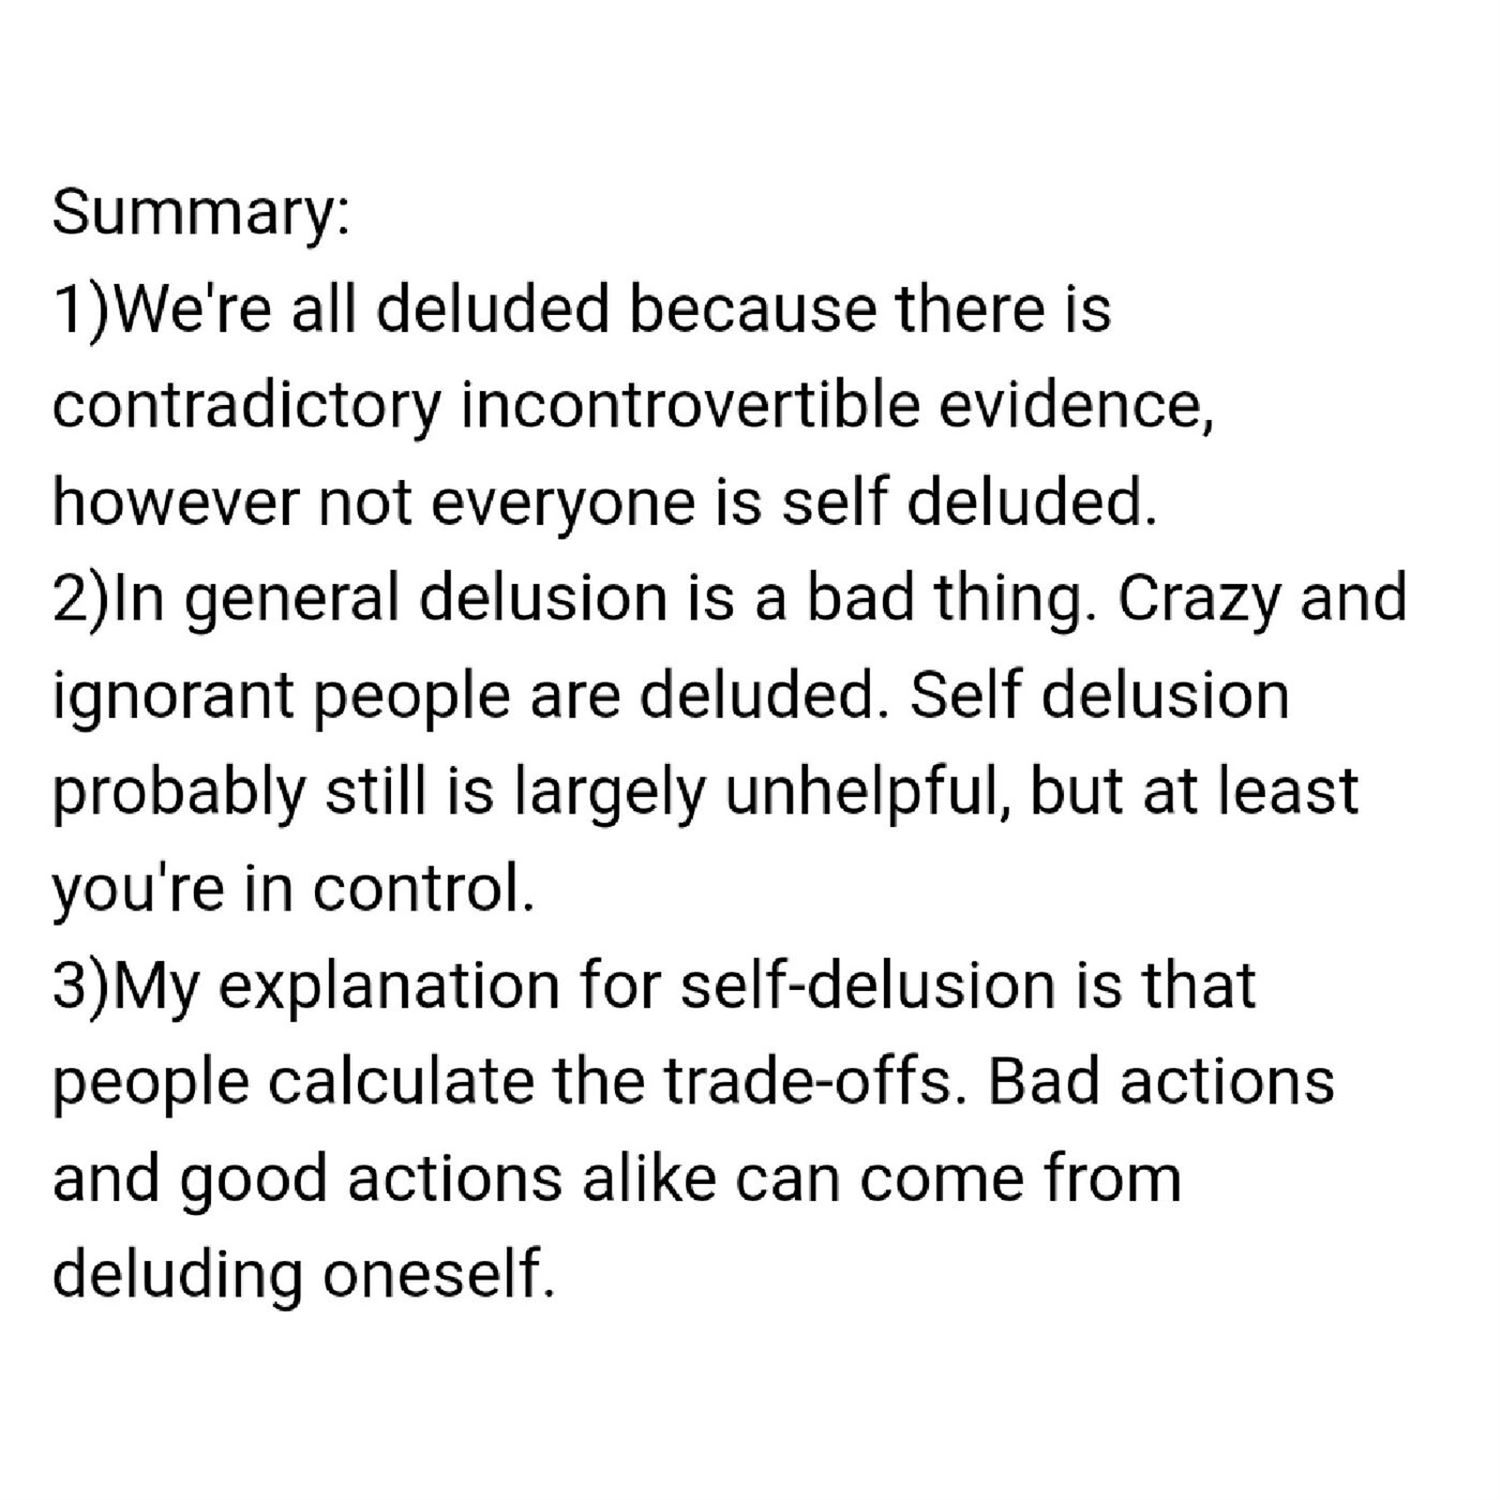 Is self delusion good or bad?